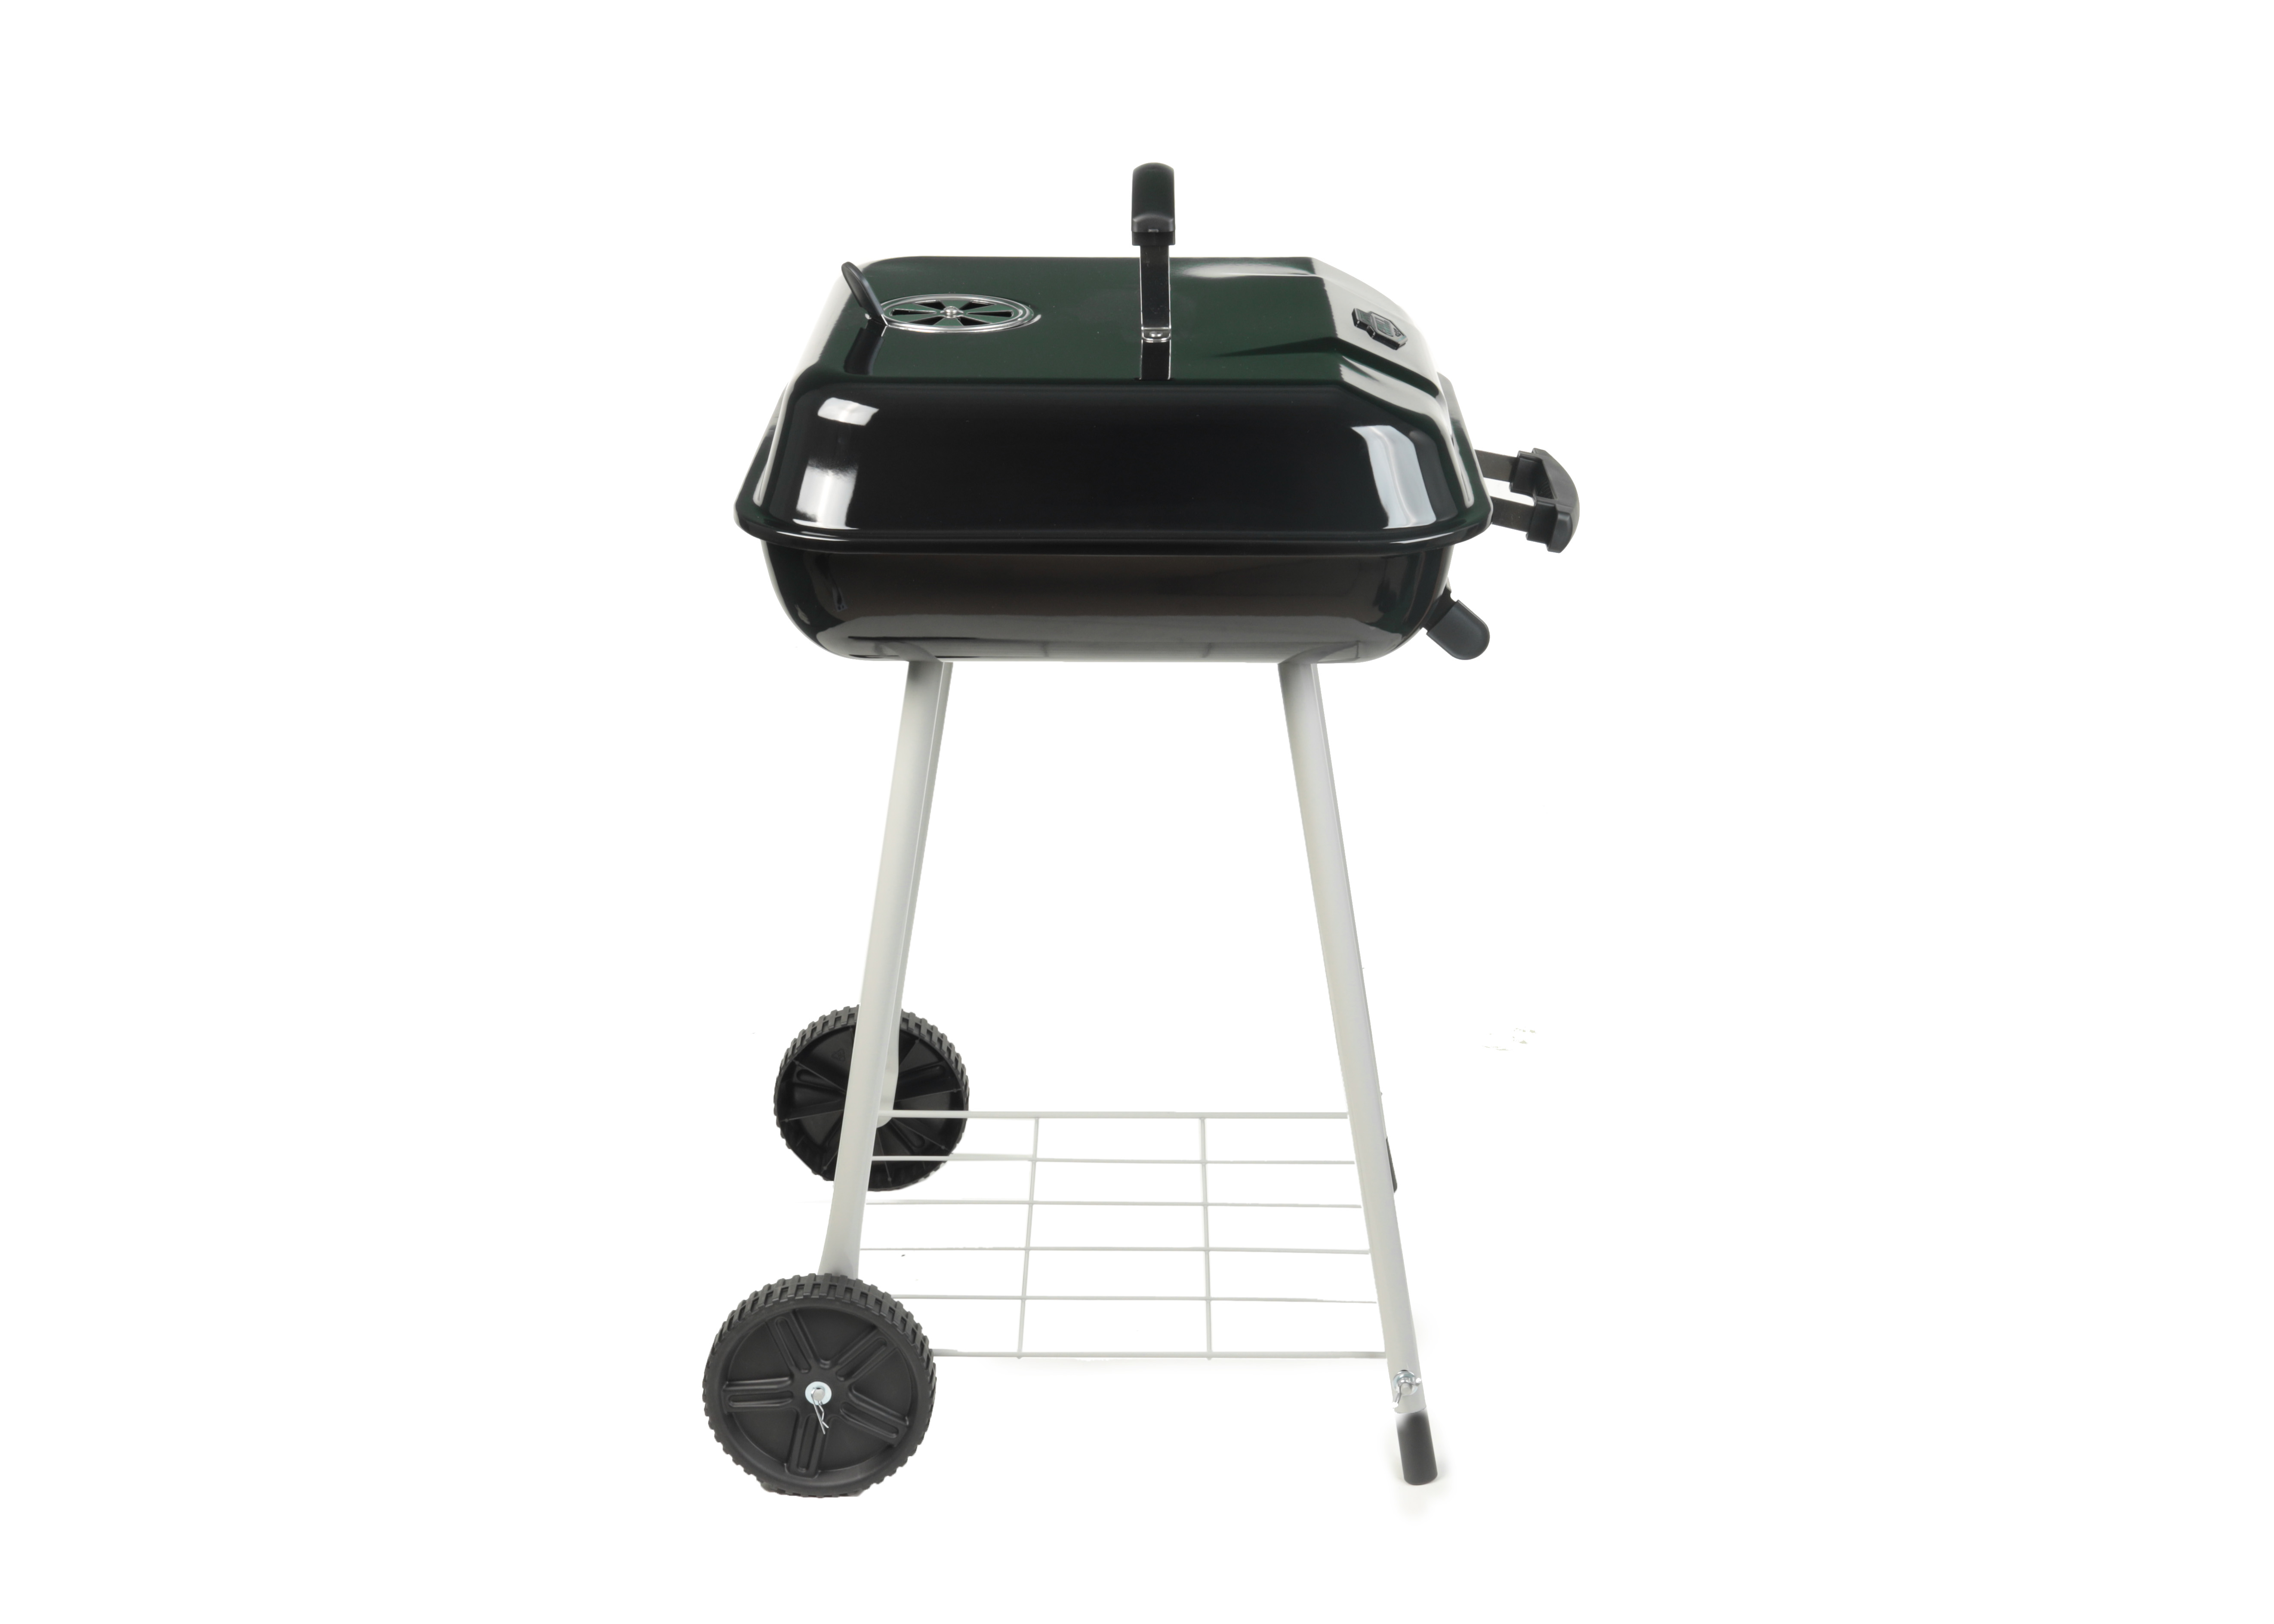 Expert Grill 17.5 Square Steel Charcoal Grill with Wheels, Black